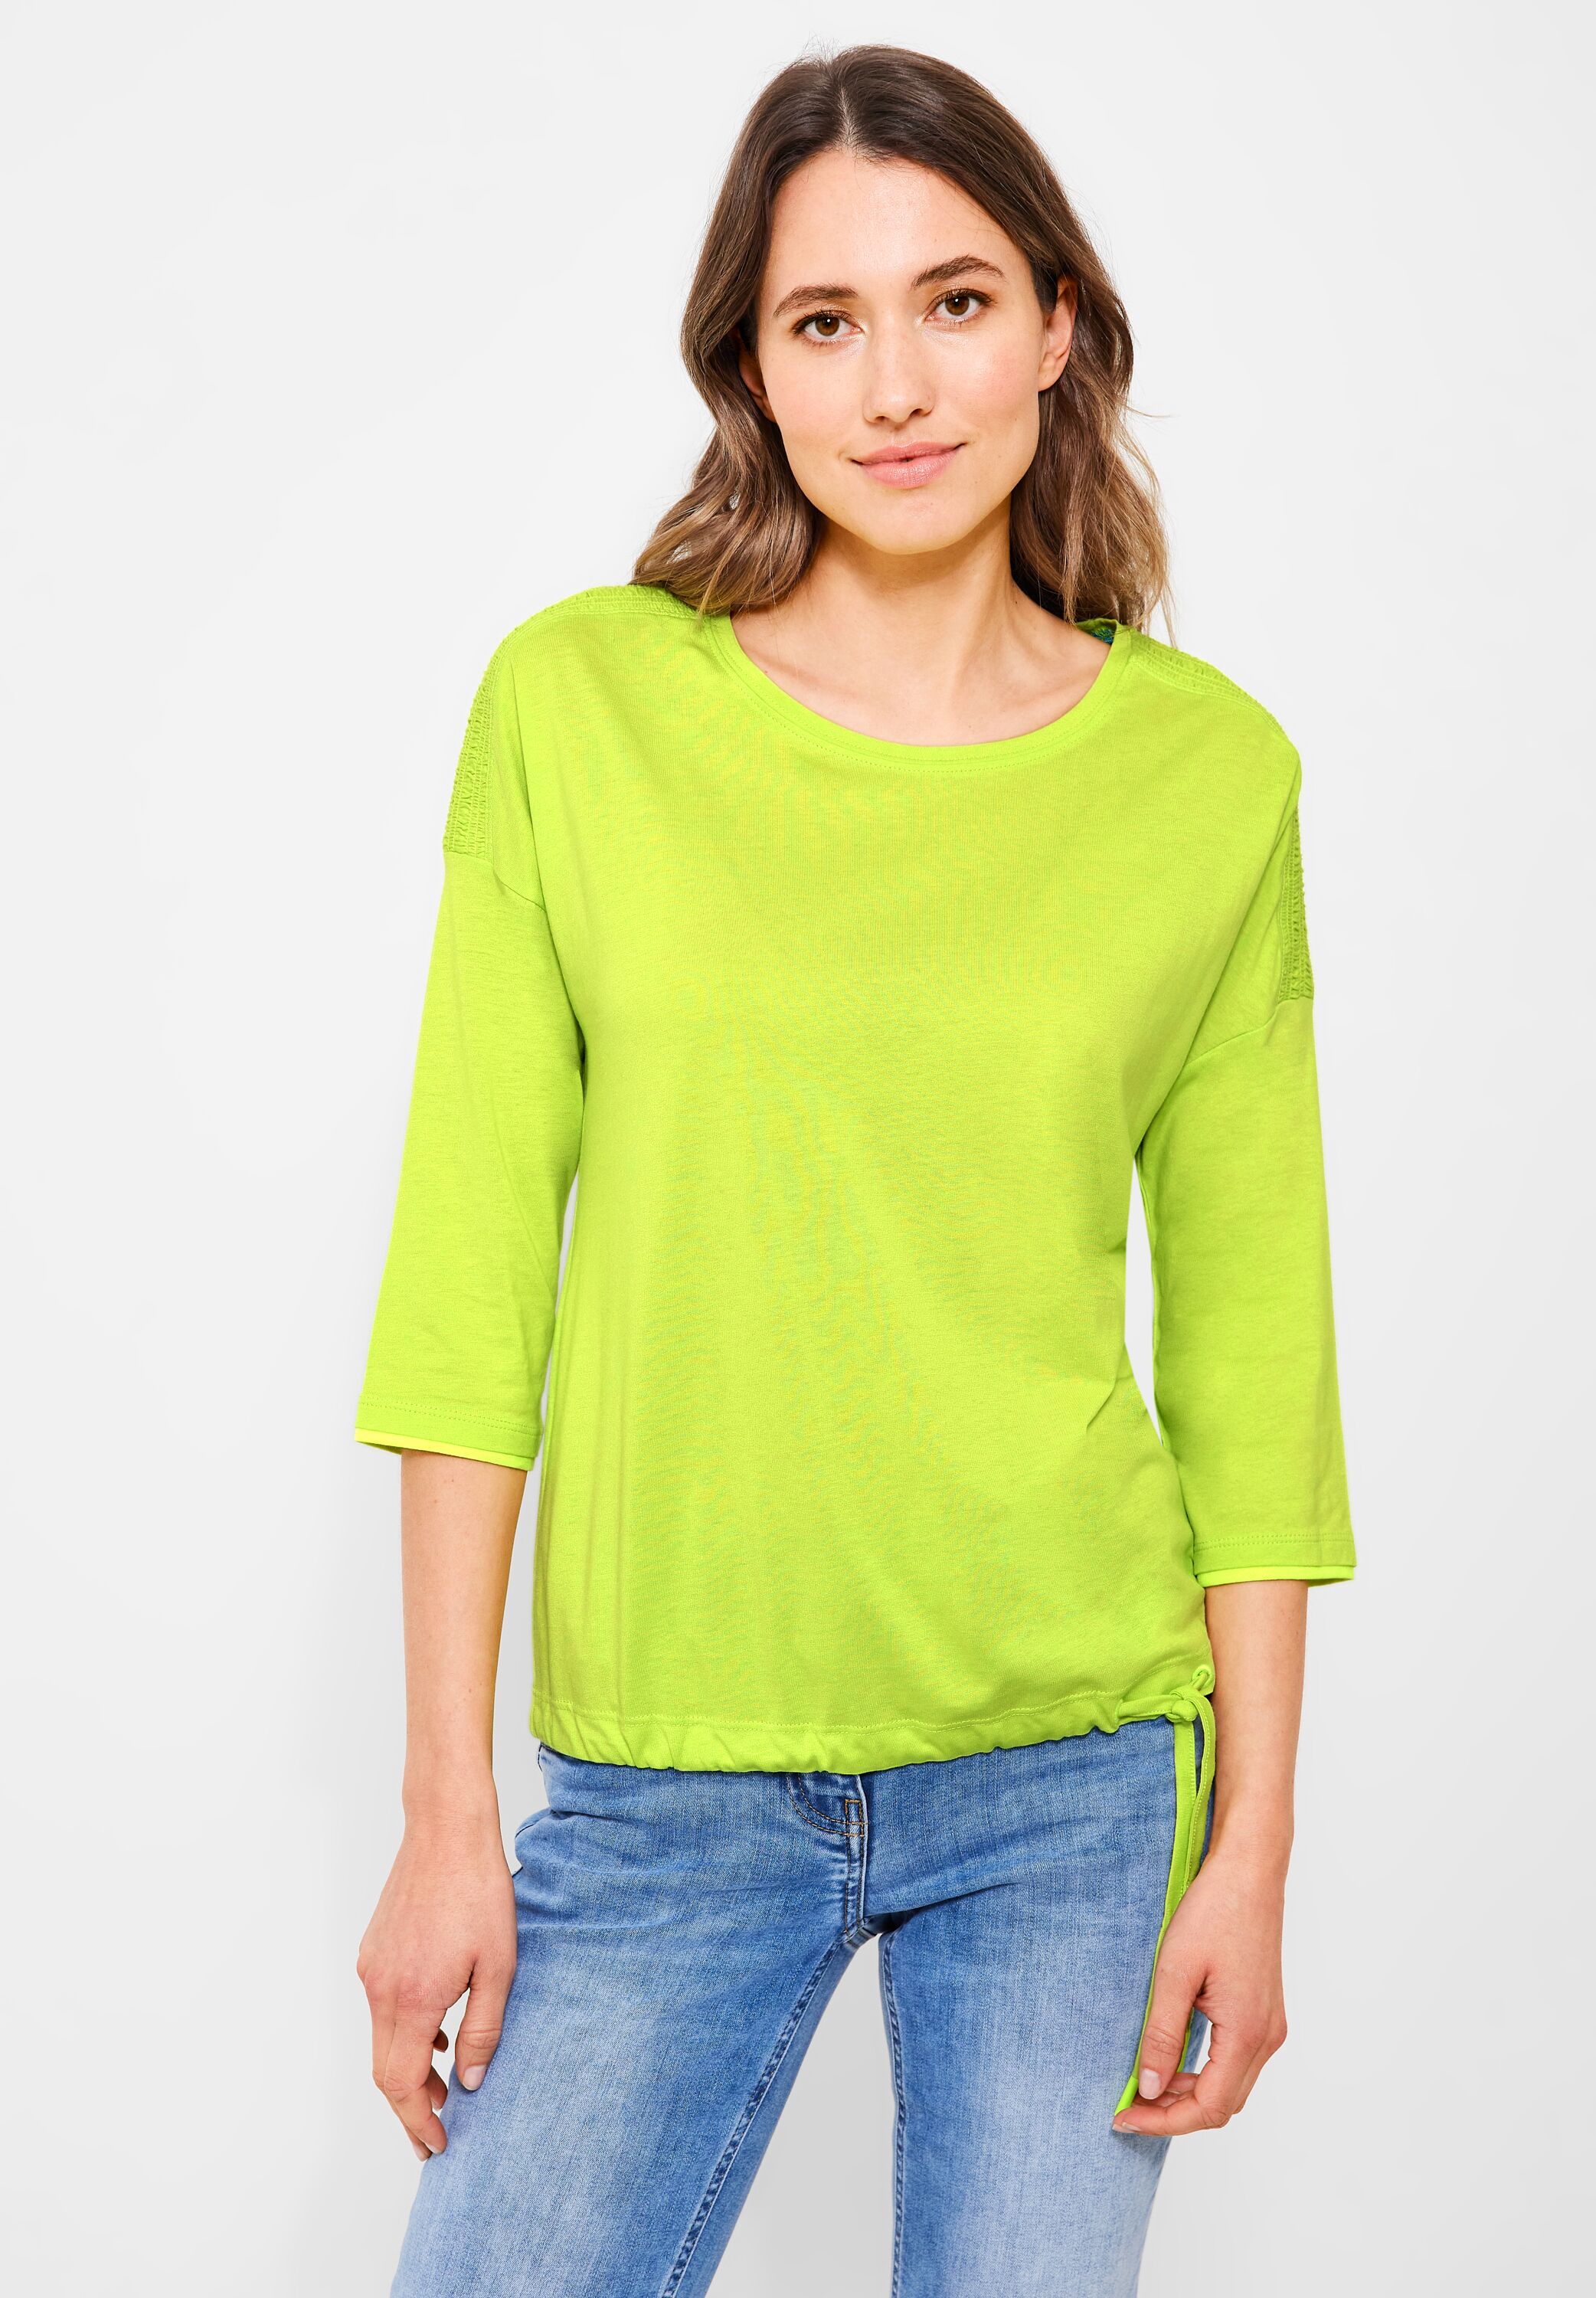 CECIL Shirt in Limelight Yellow im SALE reduziert B319382-14749 - CONCEPT  Mode